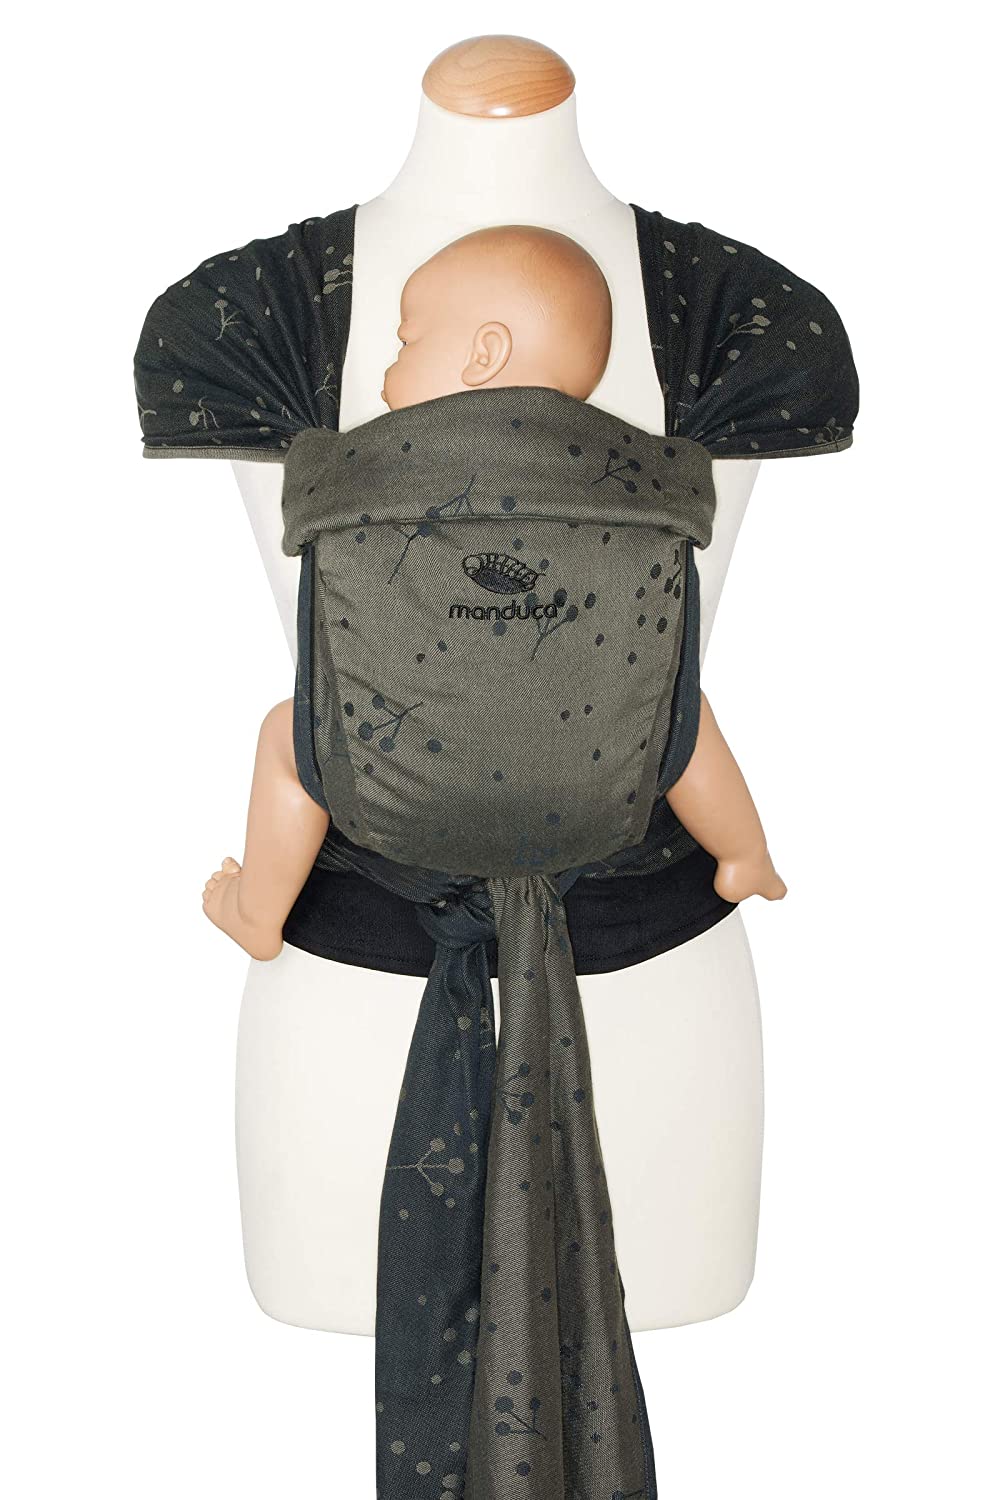 manduca Twist Baby Carrier > Craspedia Olive < Newborn Carrier Made of Sling Fabric (Organic Cotton/Jaquard Woven), Soft Waist Belt with Buckle, Fan and Tie Straps, Olive